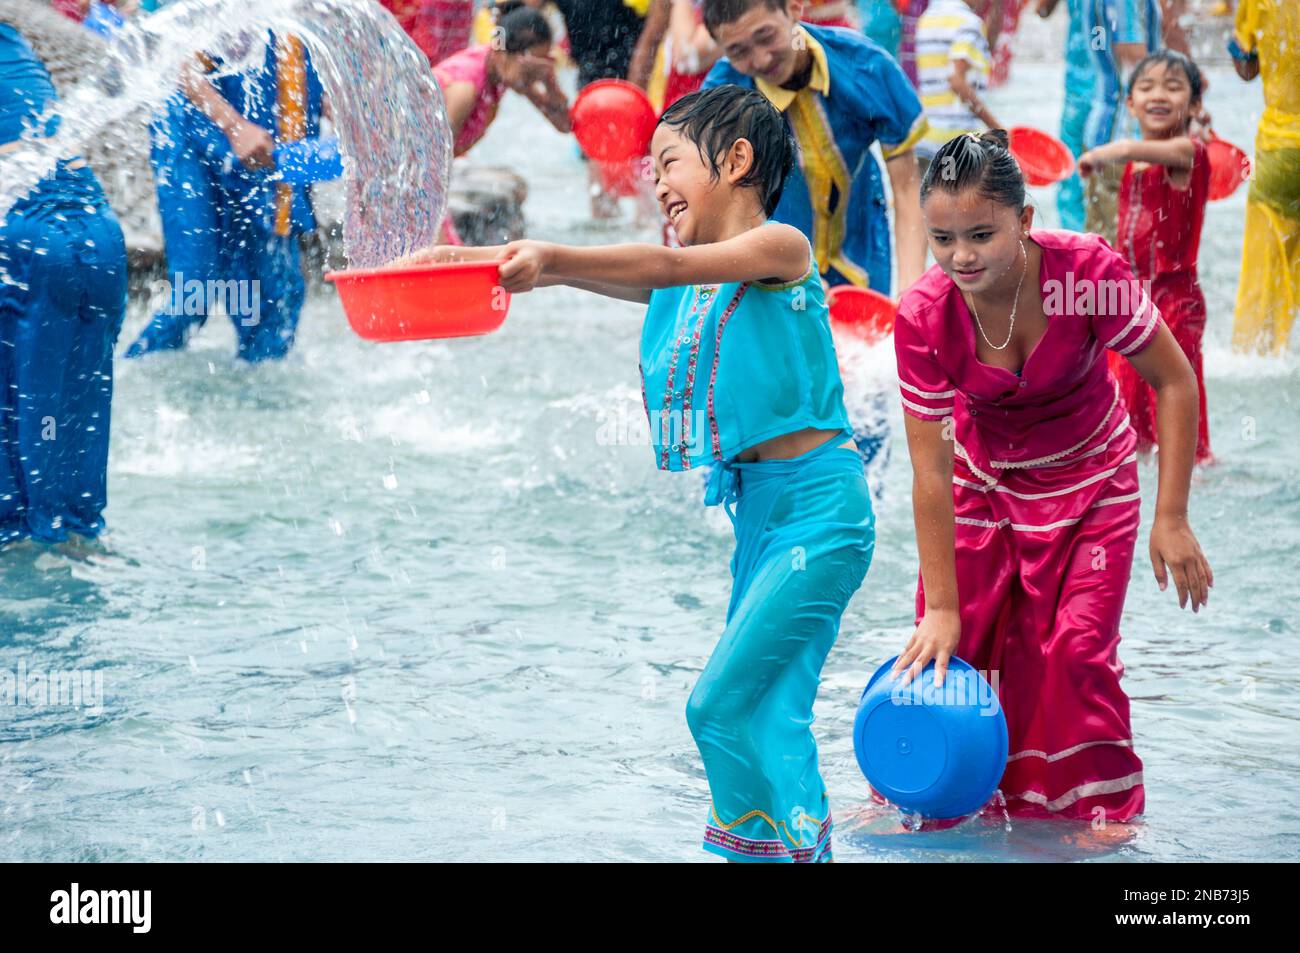 Members of the Dai minority ethnic group celebrate the new years purifying tradition of splashing water on each other at a water park in Yunnan China Stock Photo